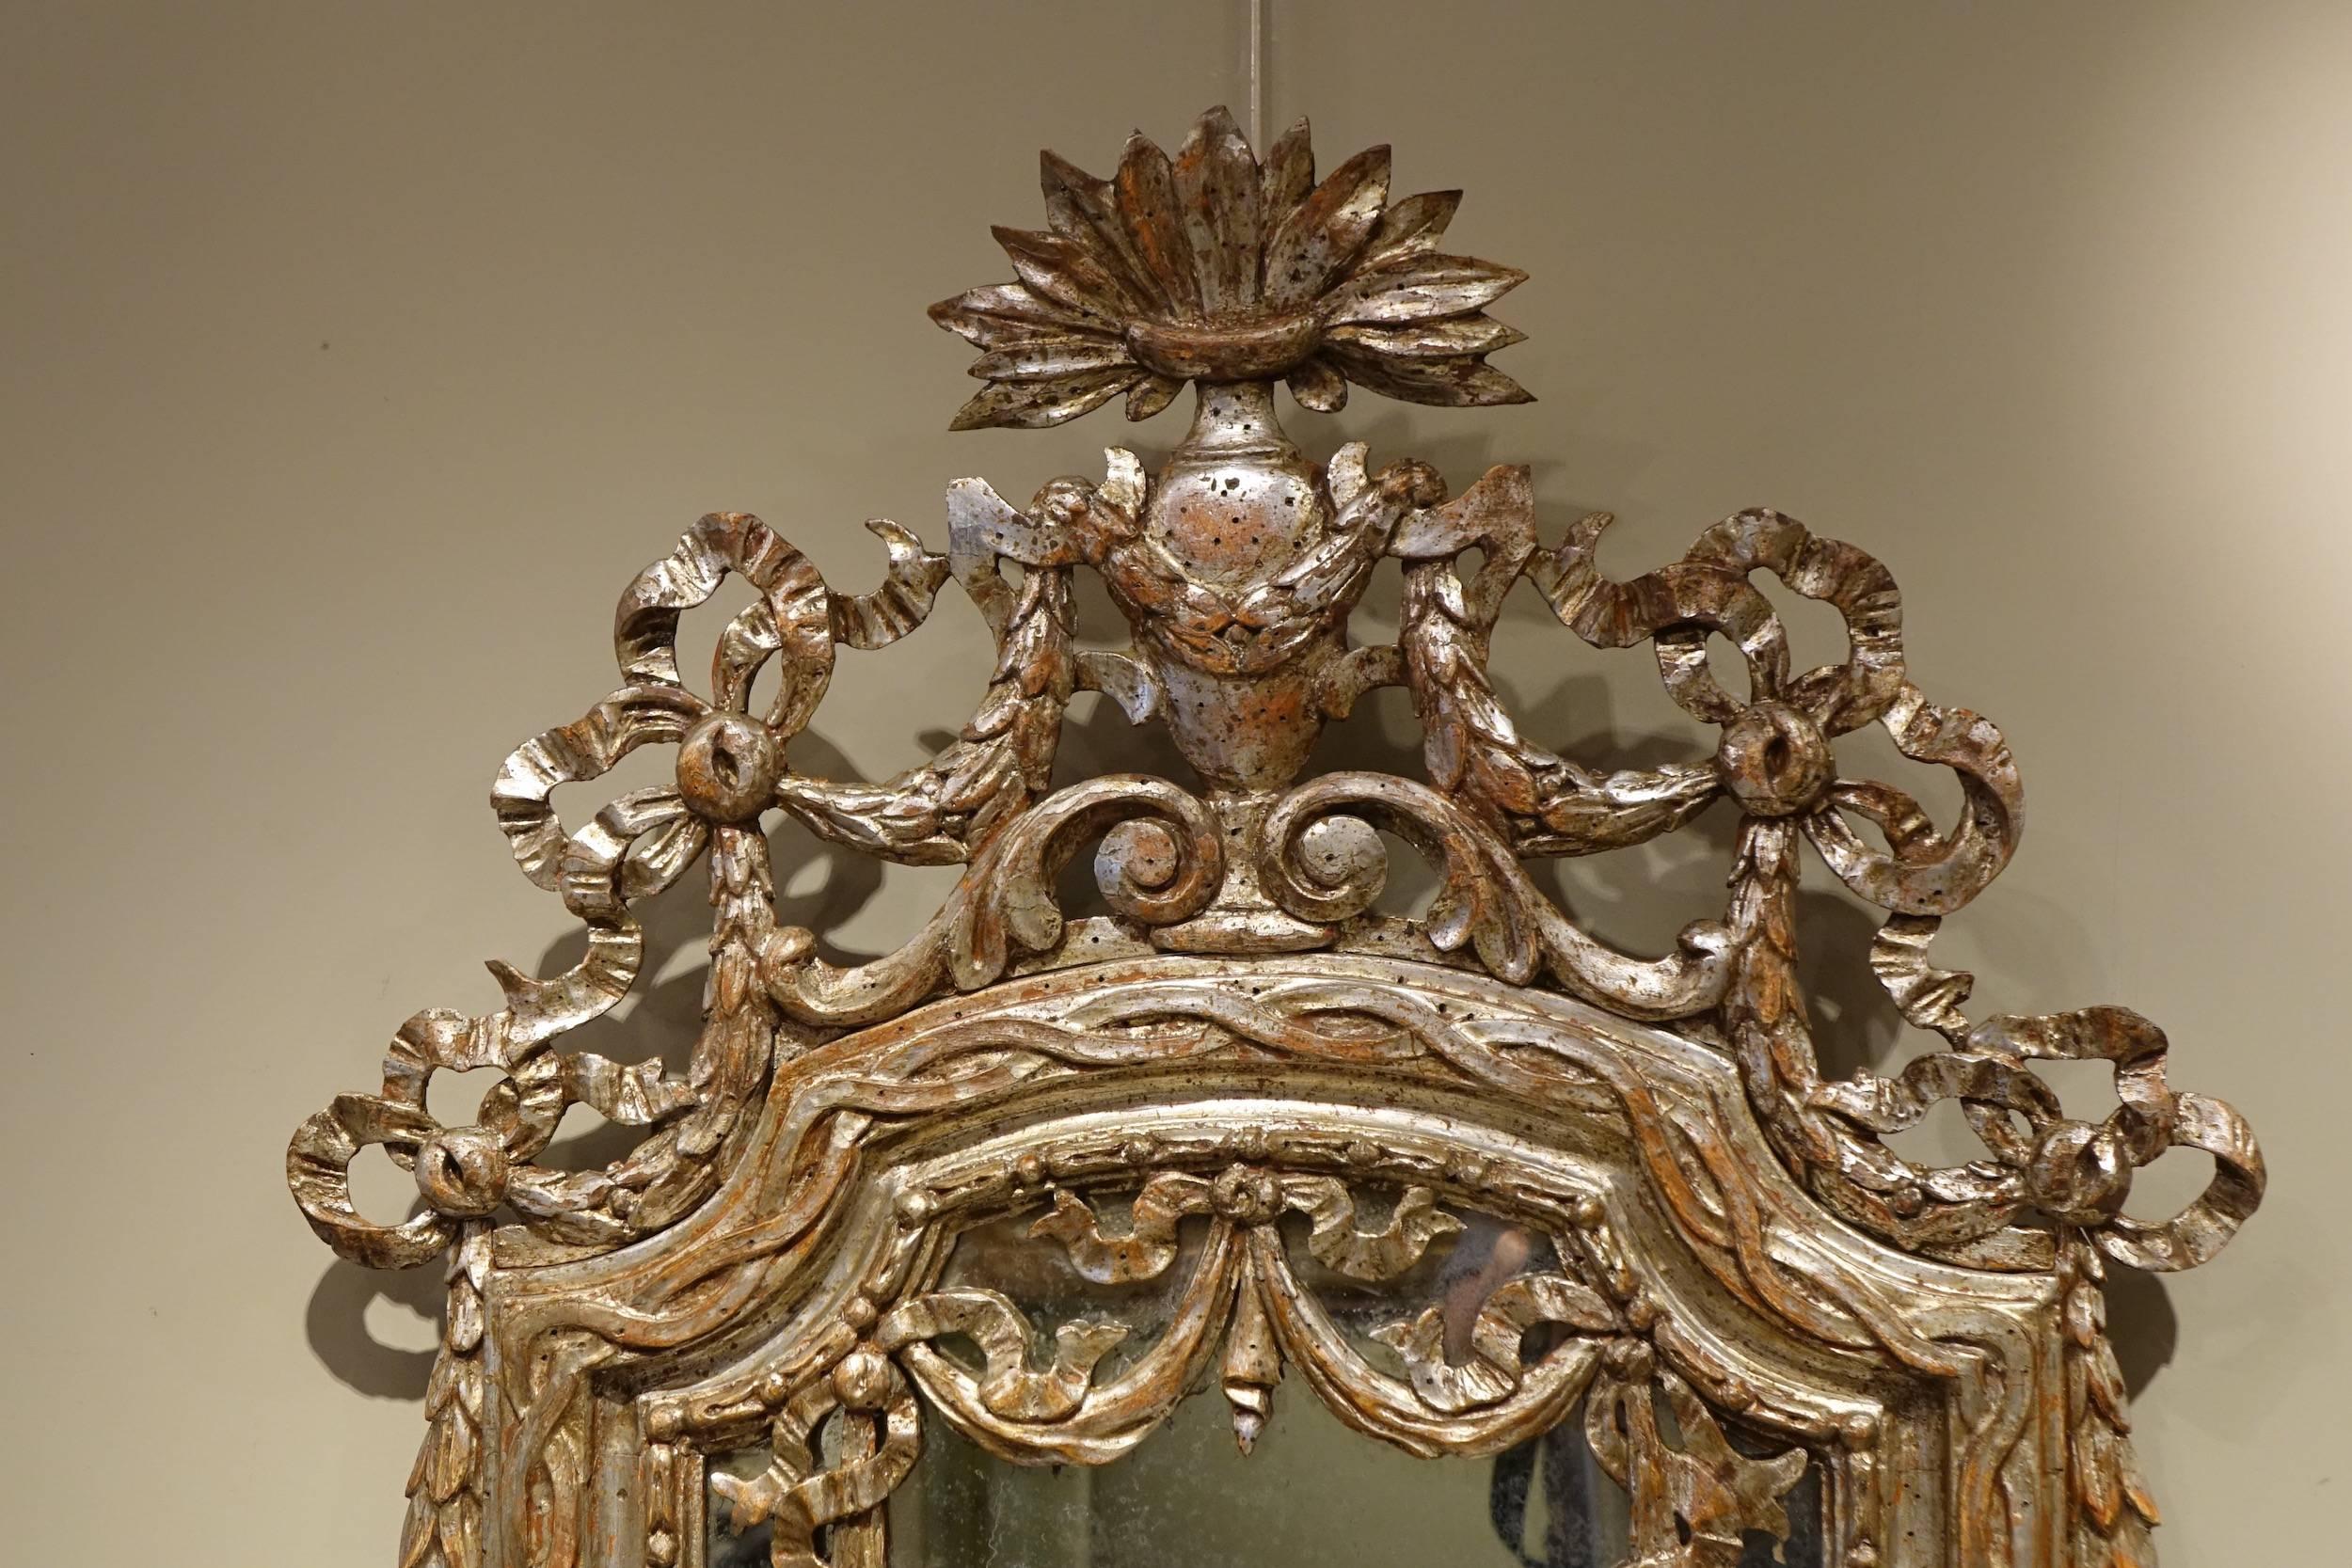 Louis XVI Mirror in carved wood and silver giltwood.
Richly decorated with garlands of flowers and ribbons
Pretty patina and wear due to the time. Overall original silver gilt.
Original mercury coated glass

Provence (or Italy), 18th century.